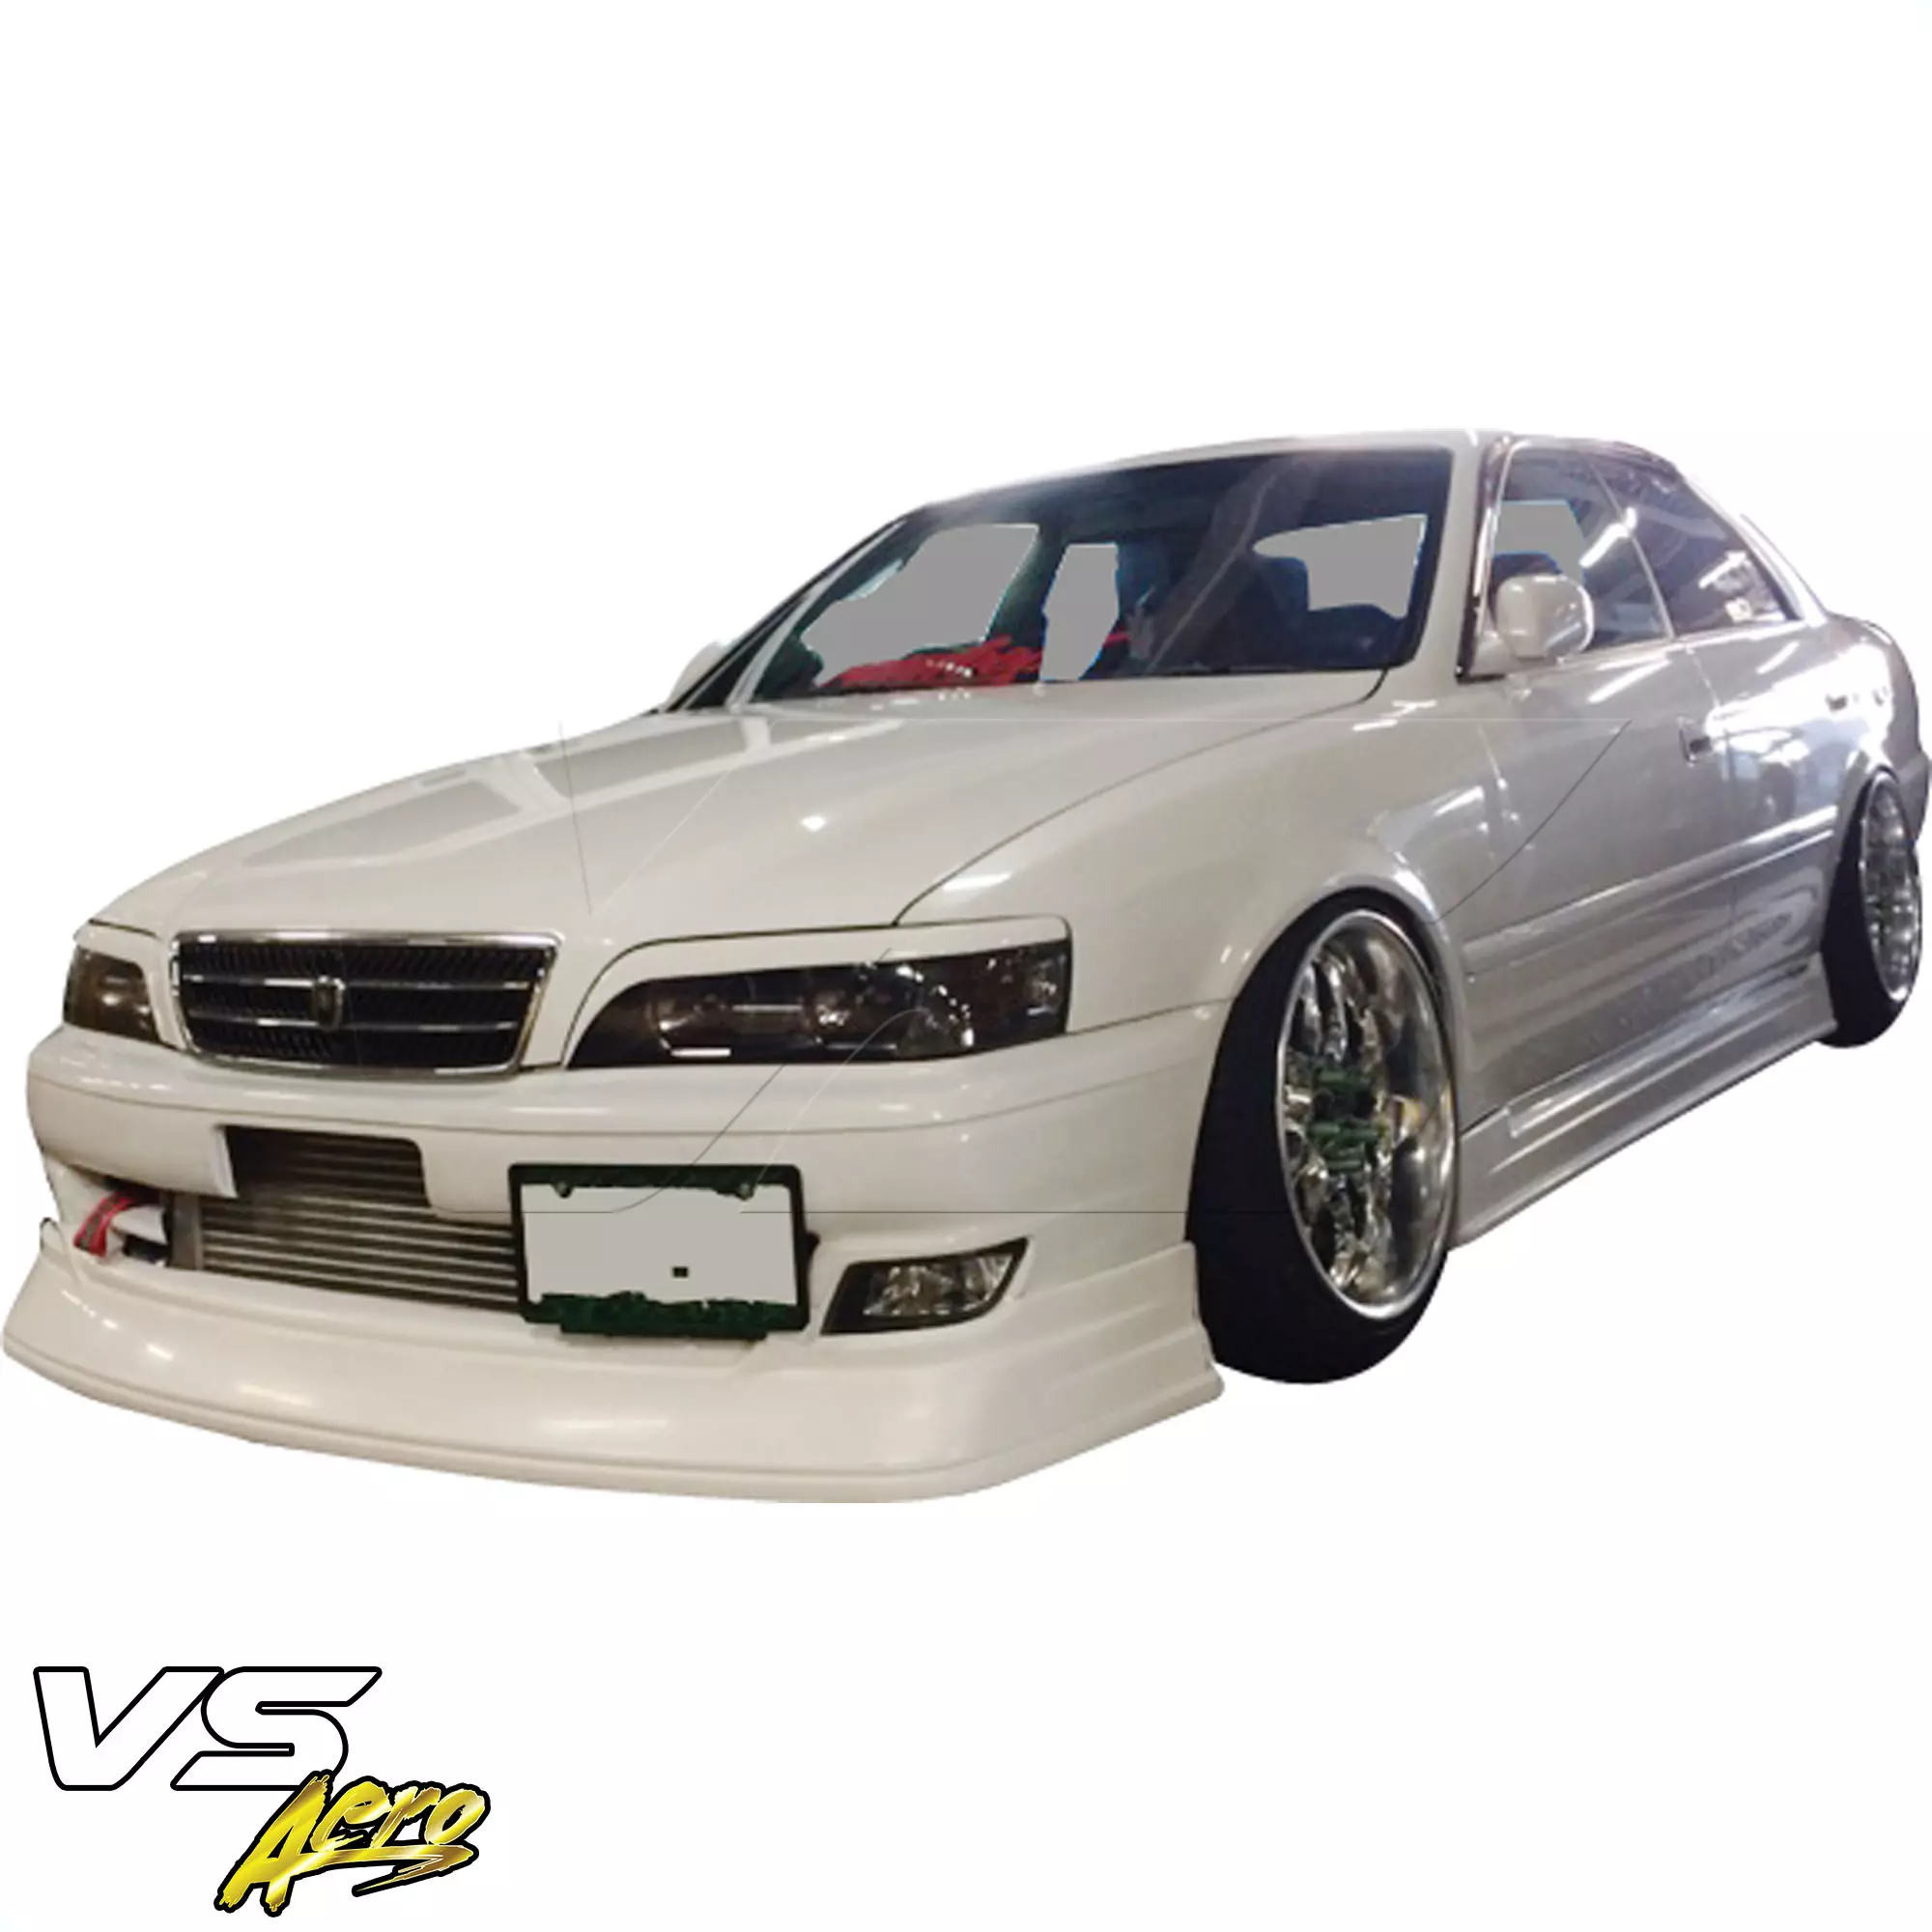 VSaero FRP TRAU Late Front Lip Valance > Toyota Chaser JZX100 1999-2000 - Image 9